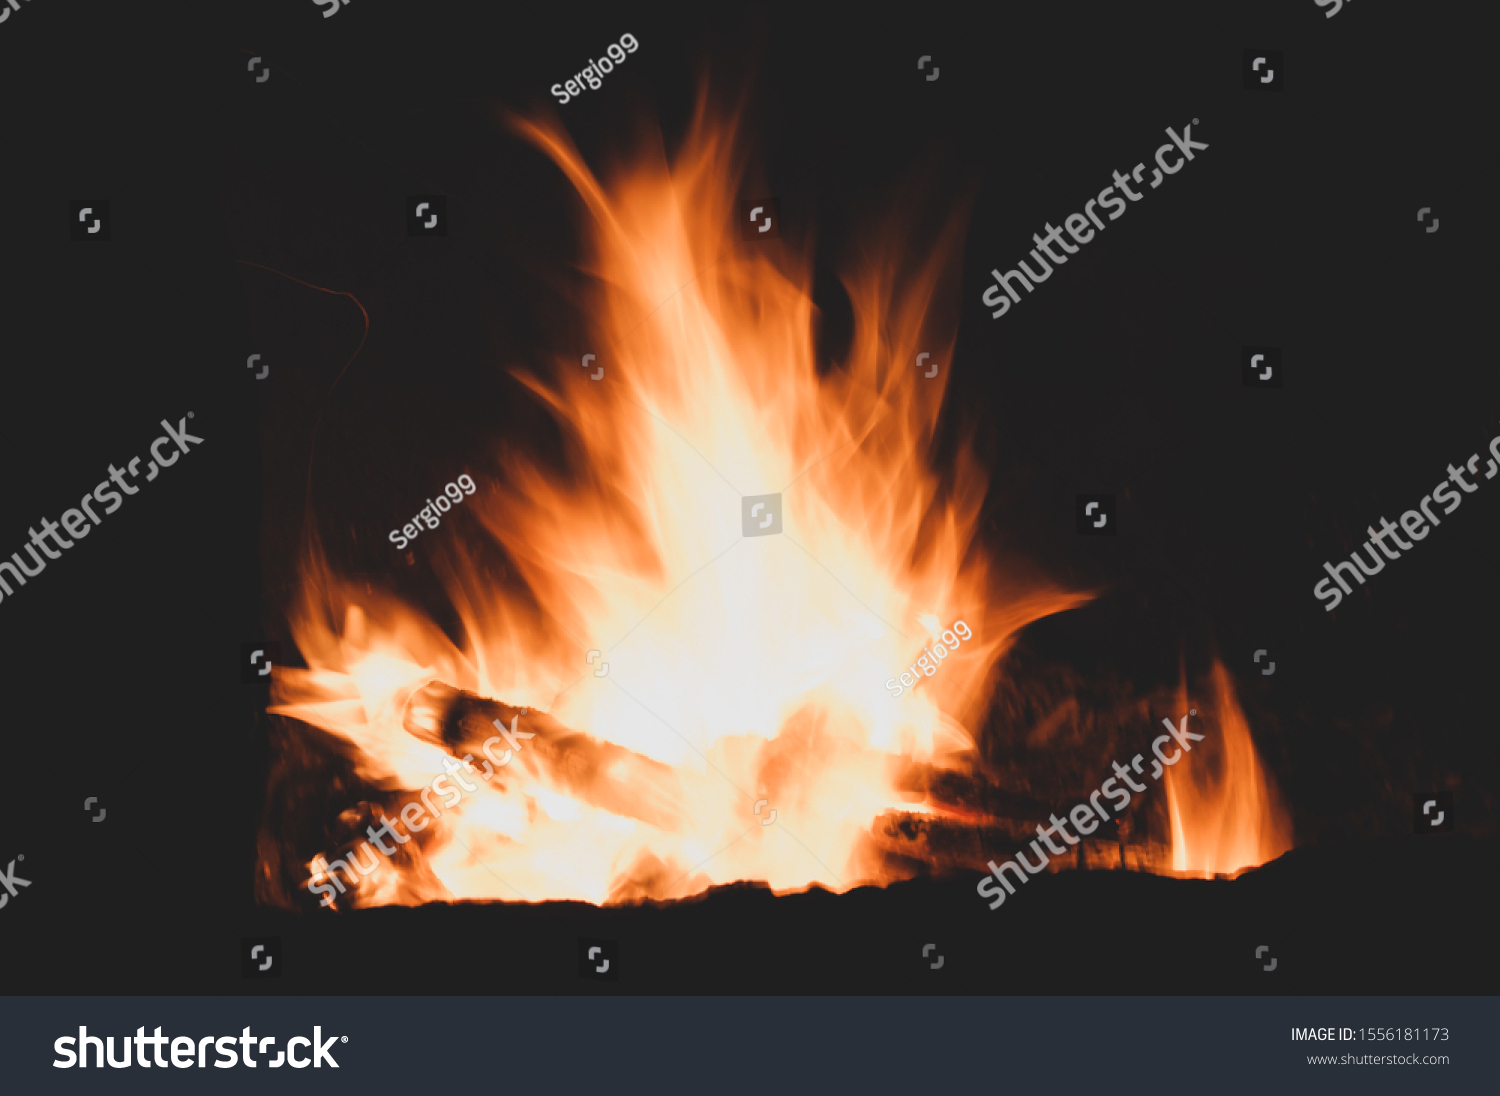 Firewood burns brightly. Light scatters darkness. Bright colorful sparkling flaming warming fire. Burning fire on black background close-up. Horizontal background #1556181173